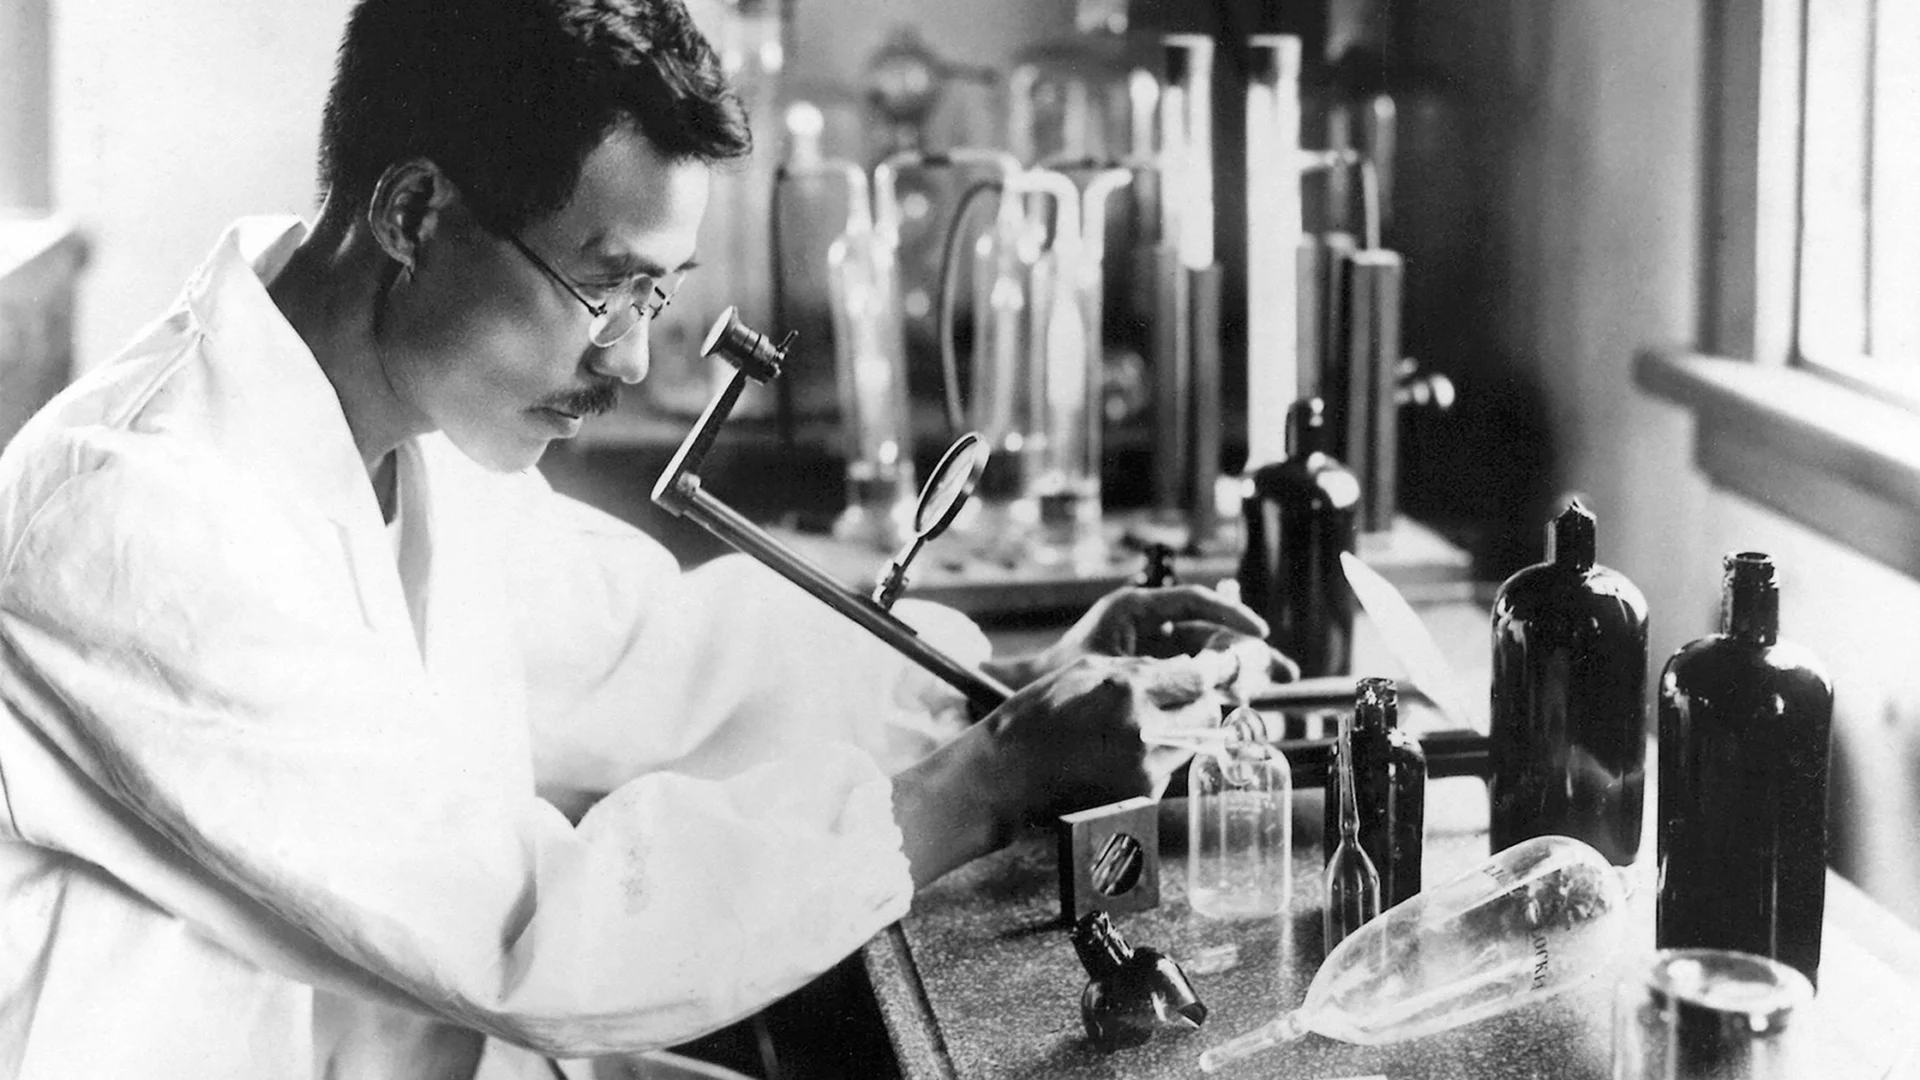 Historical image of Shionogi employee in the lab.